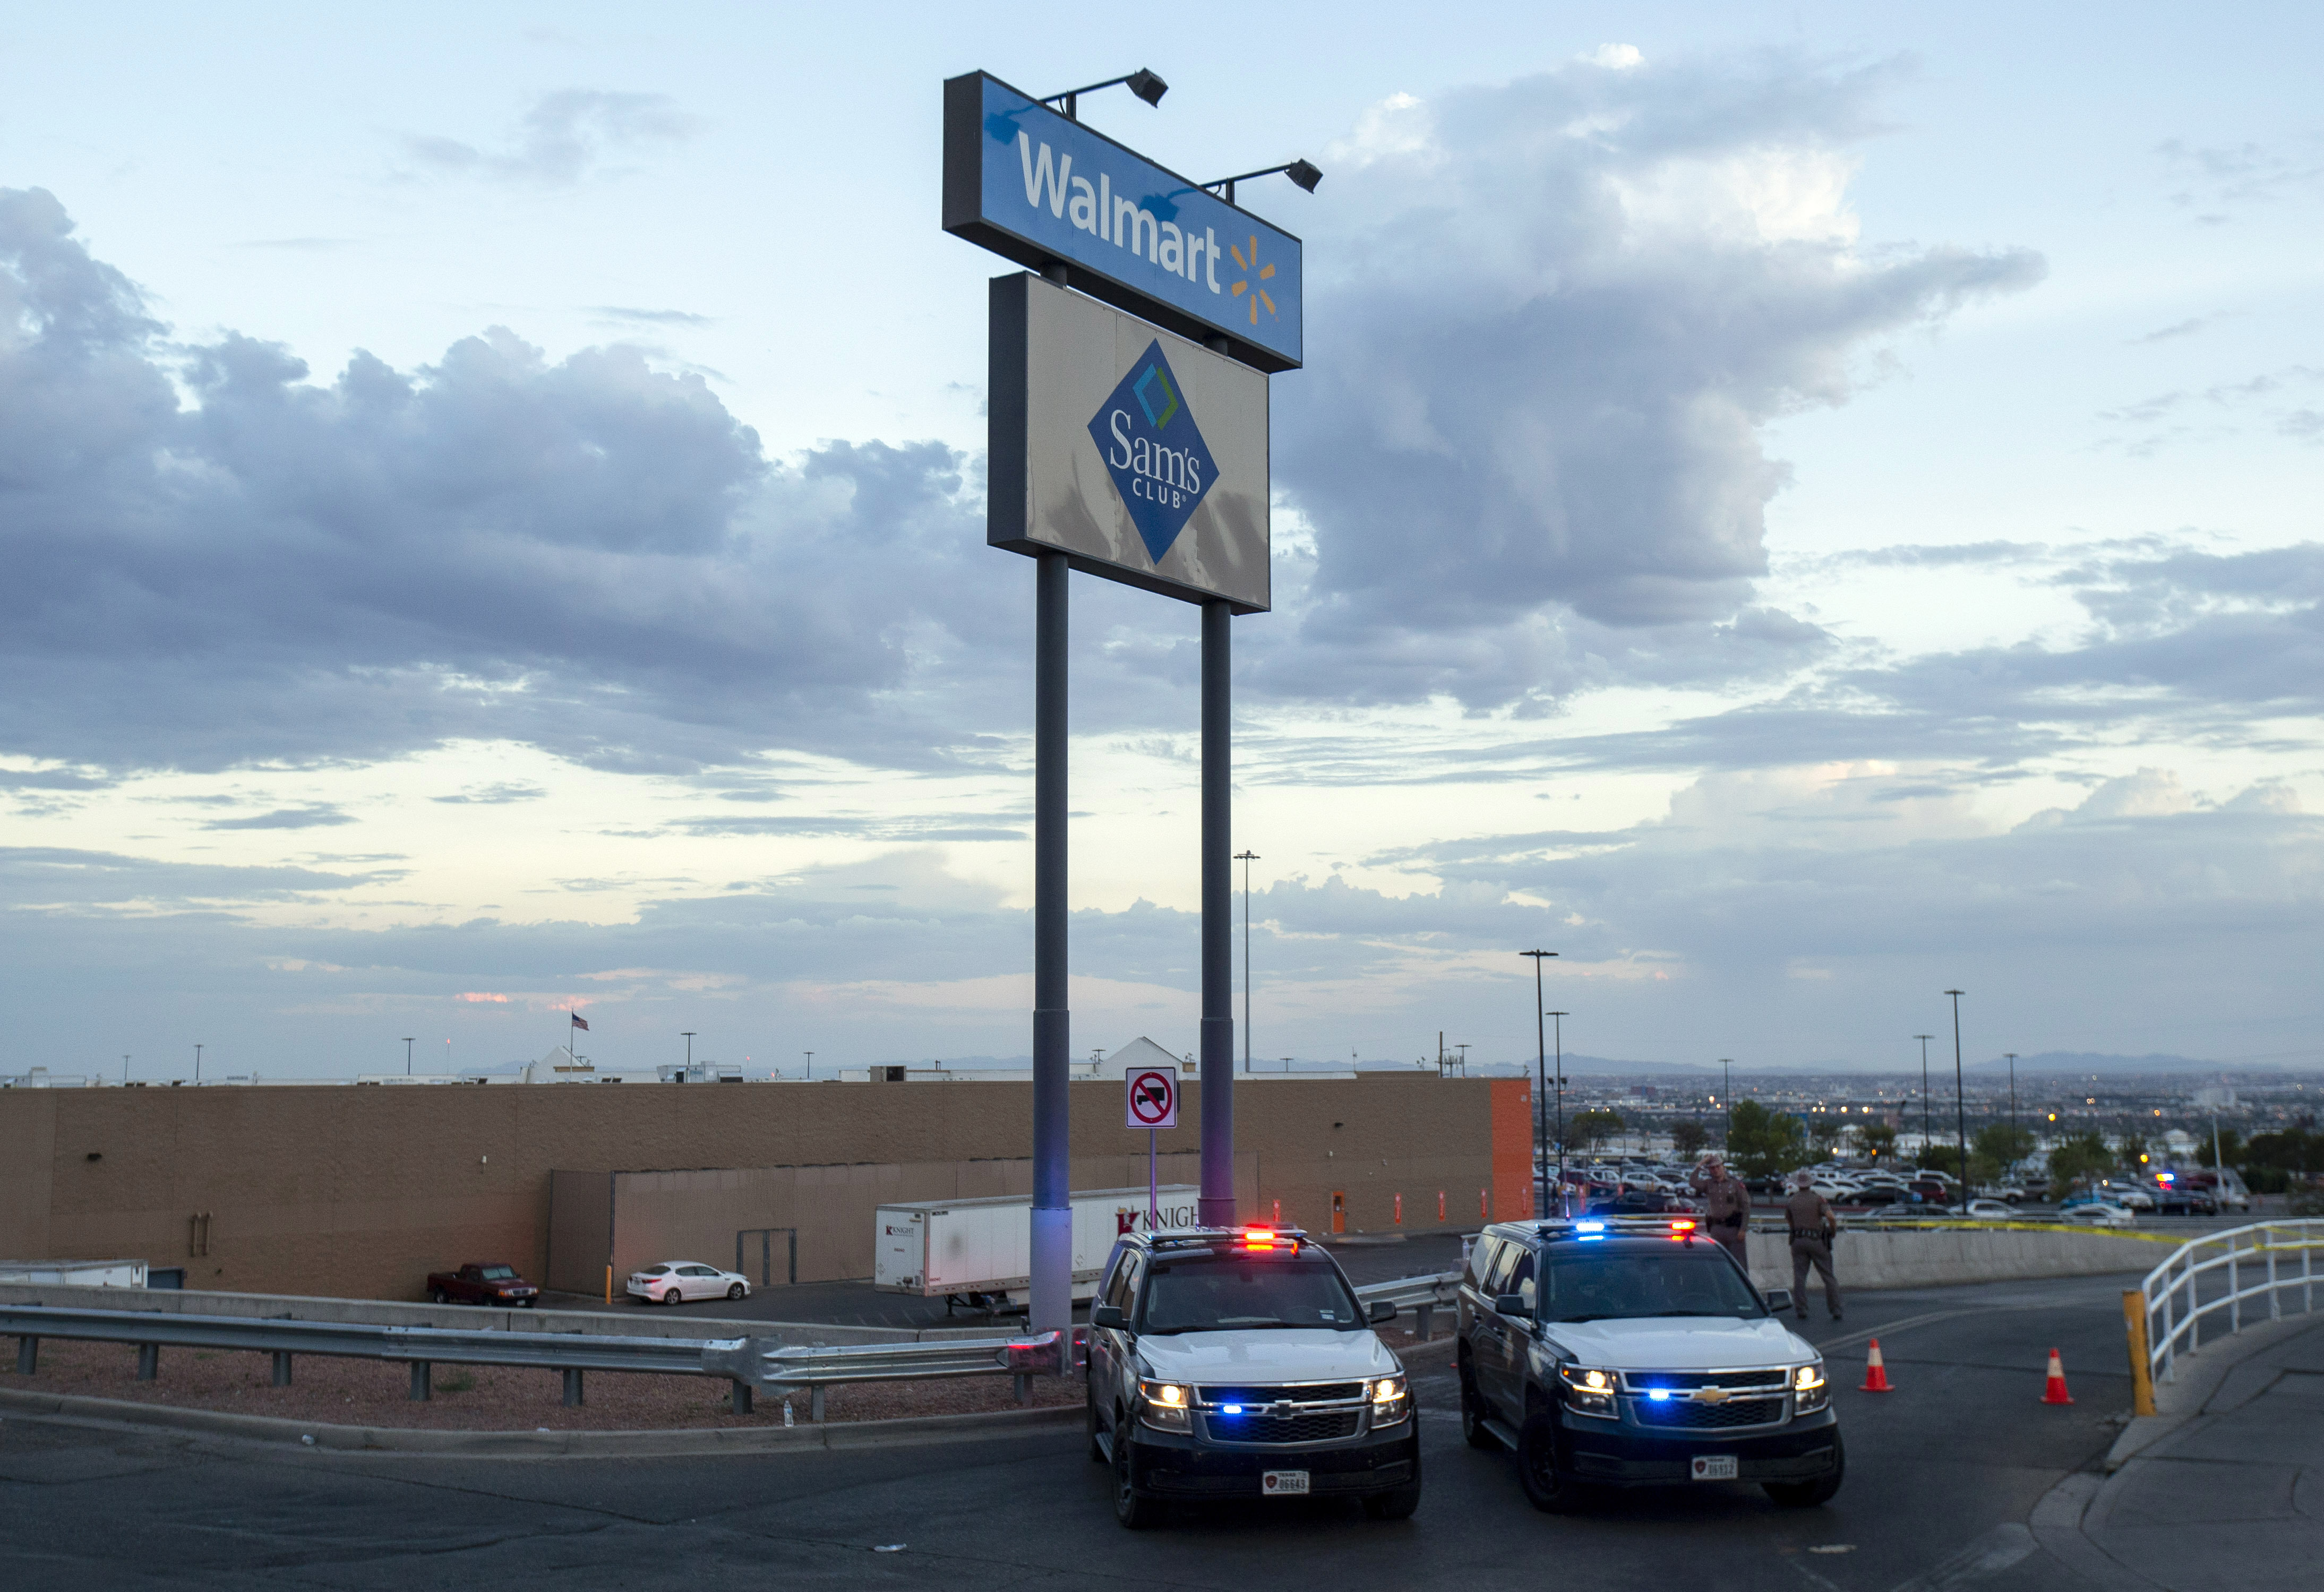 9 killed as man goes on shooting spree in Omaha mall - The